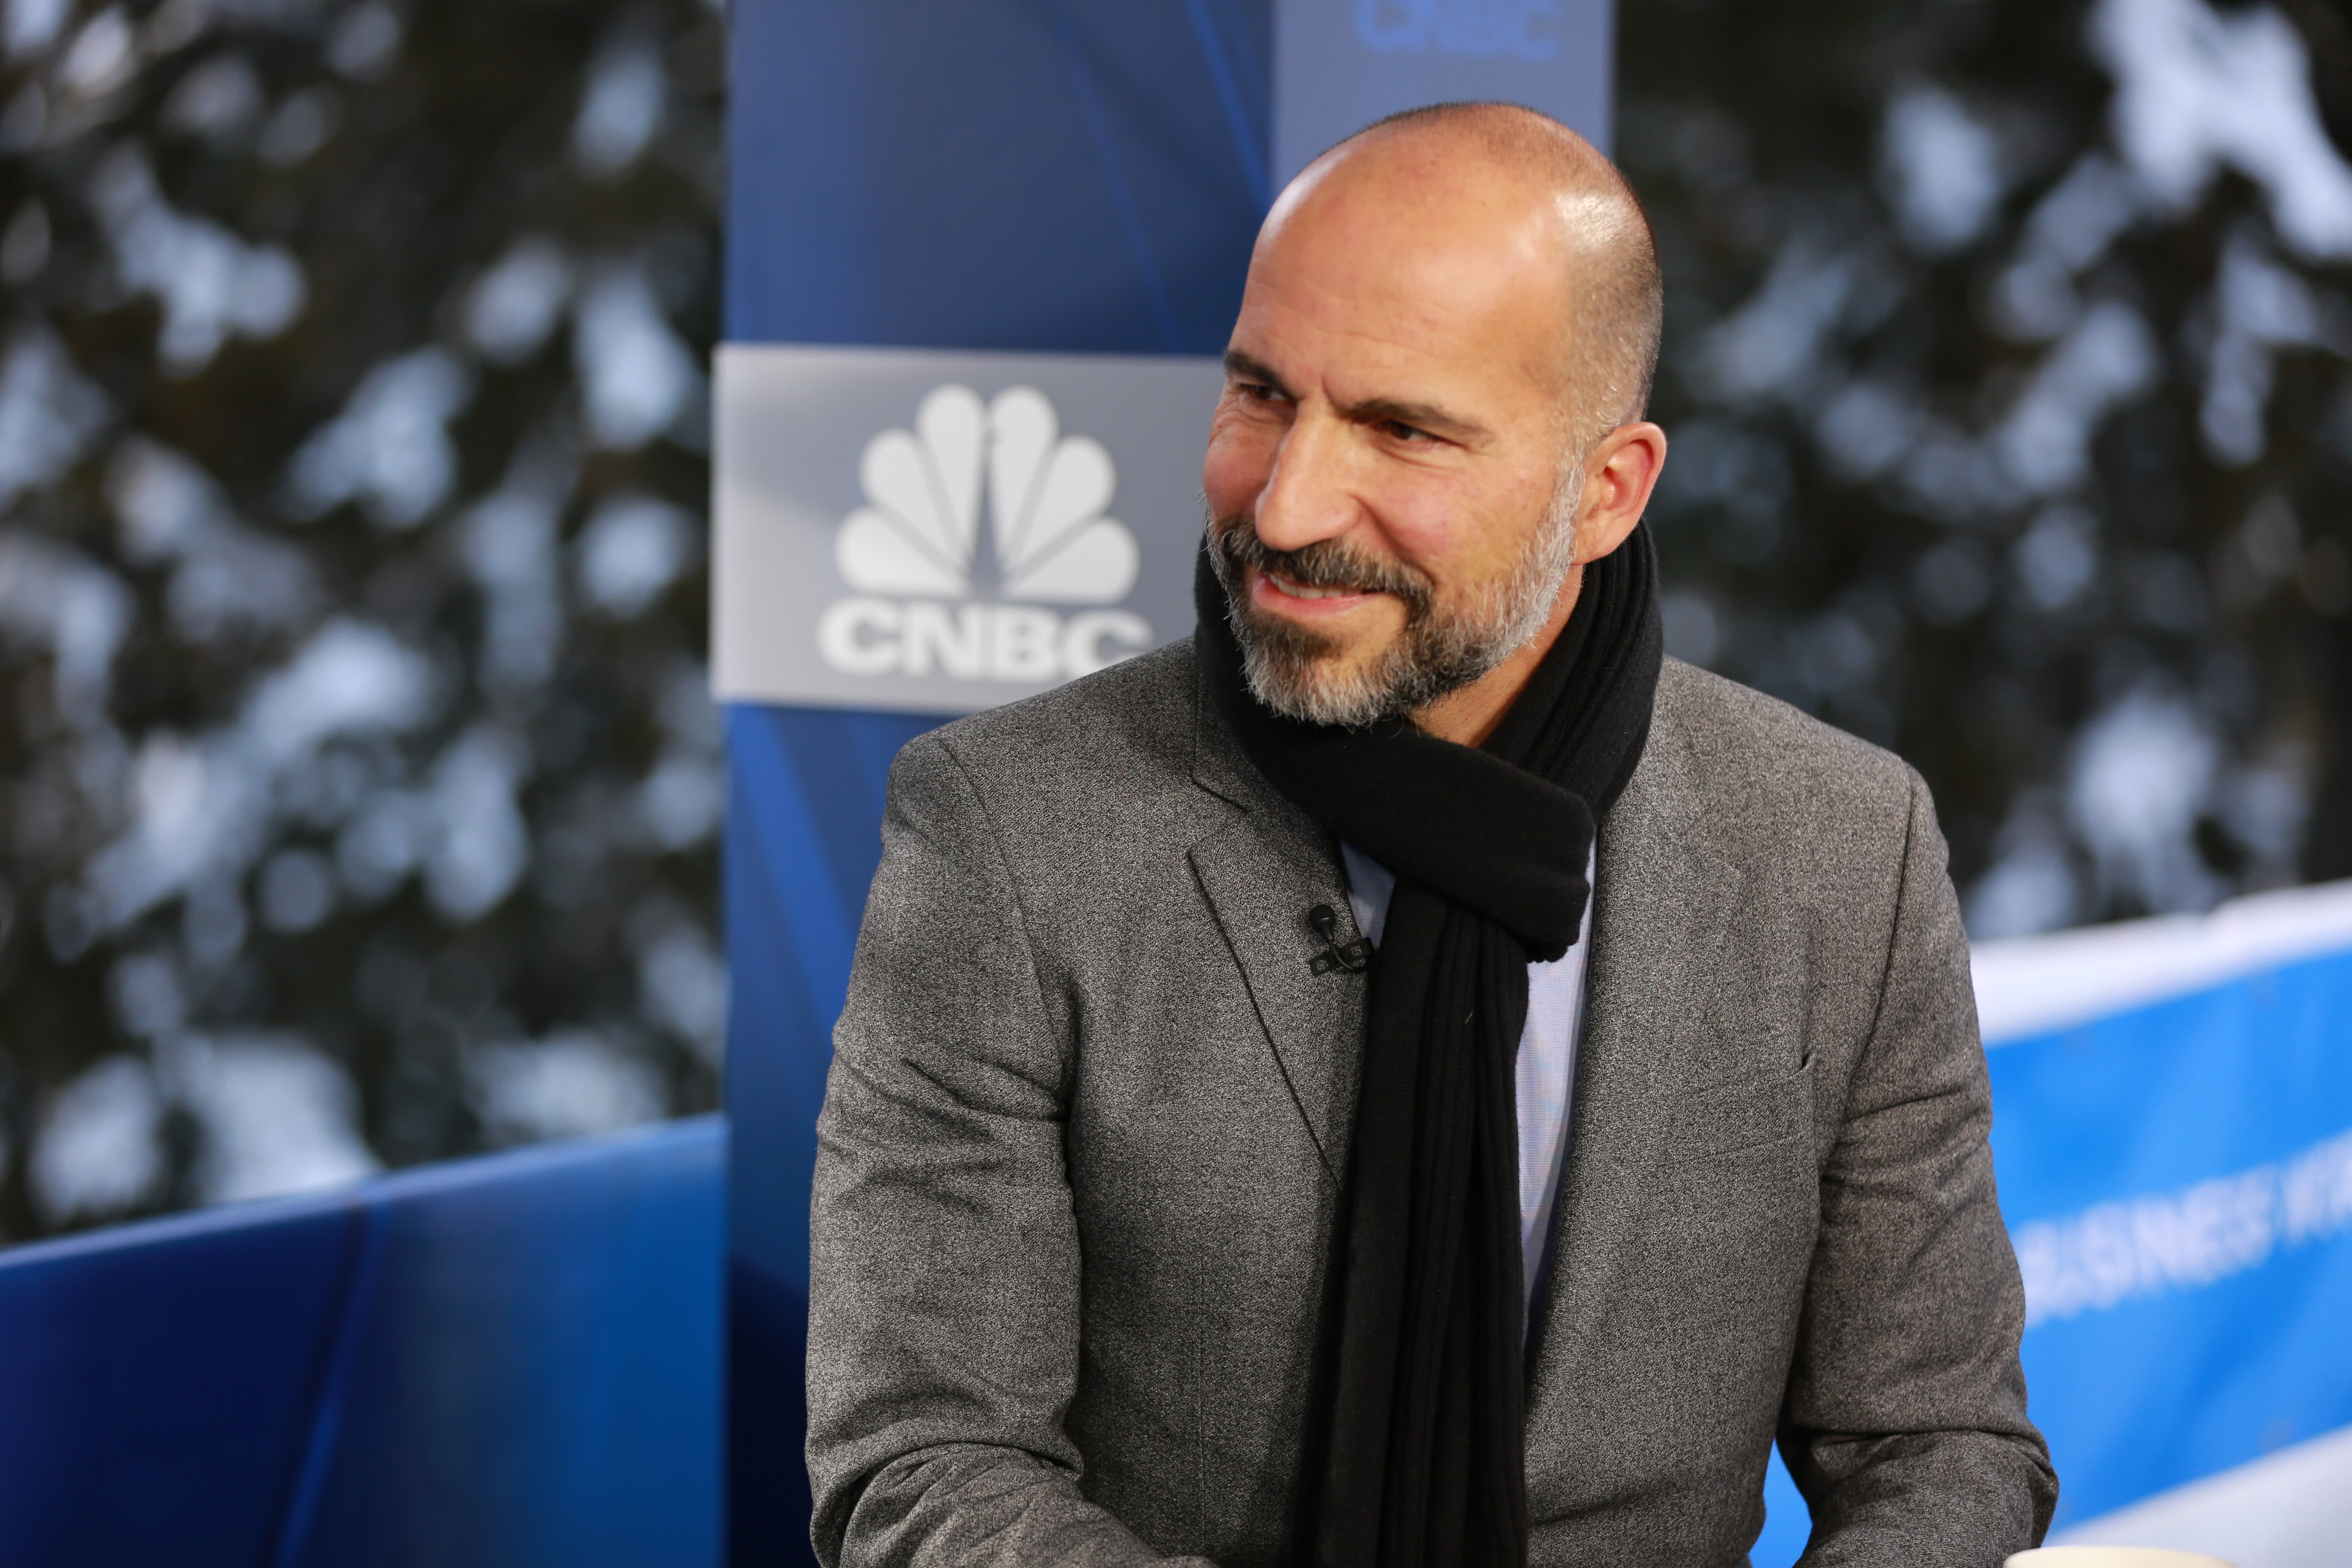 The Uber CEO says the company could go into cannabis delivery